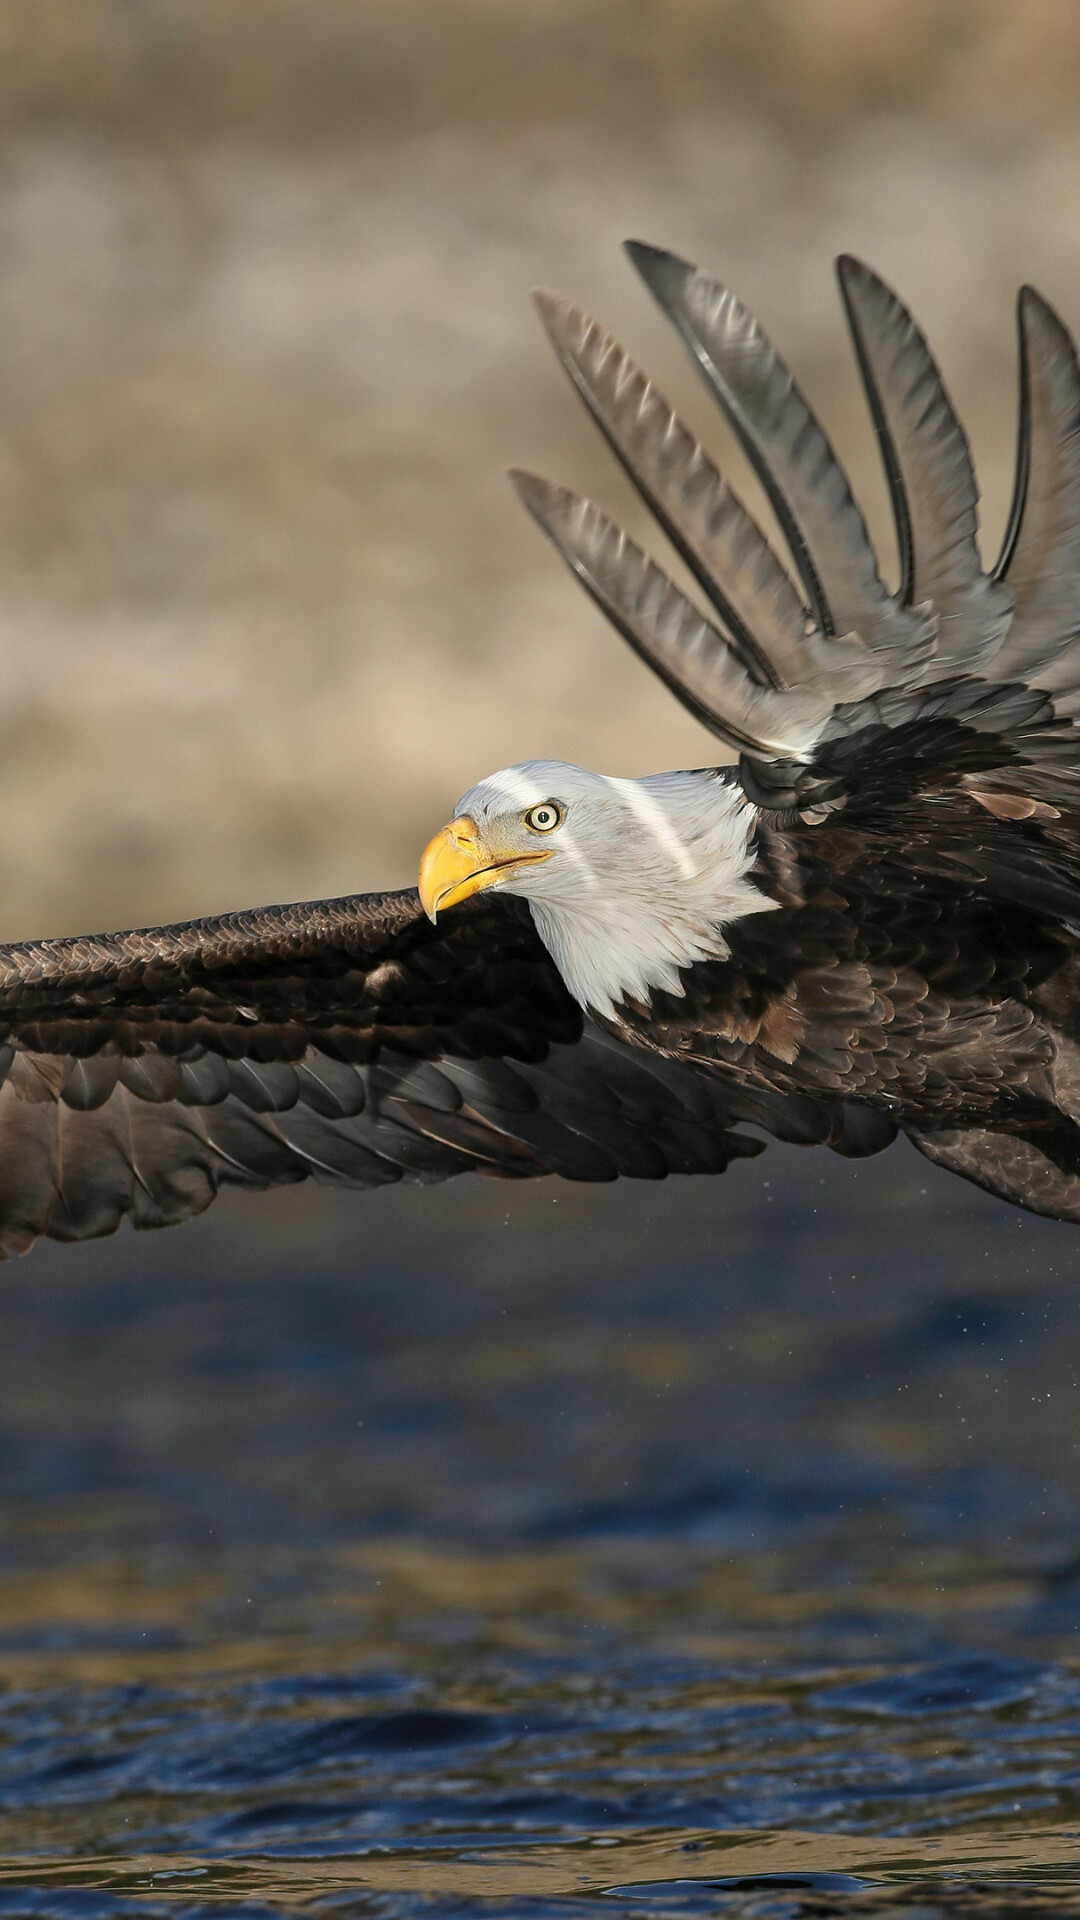 Eagle: An eagle's wings are long and broad, making them effective for soaring. 1080x1920 Full HD Background.